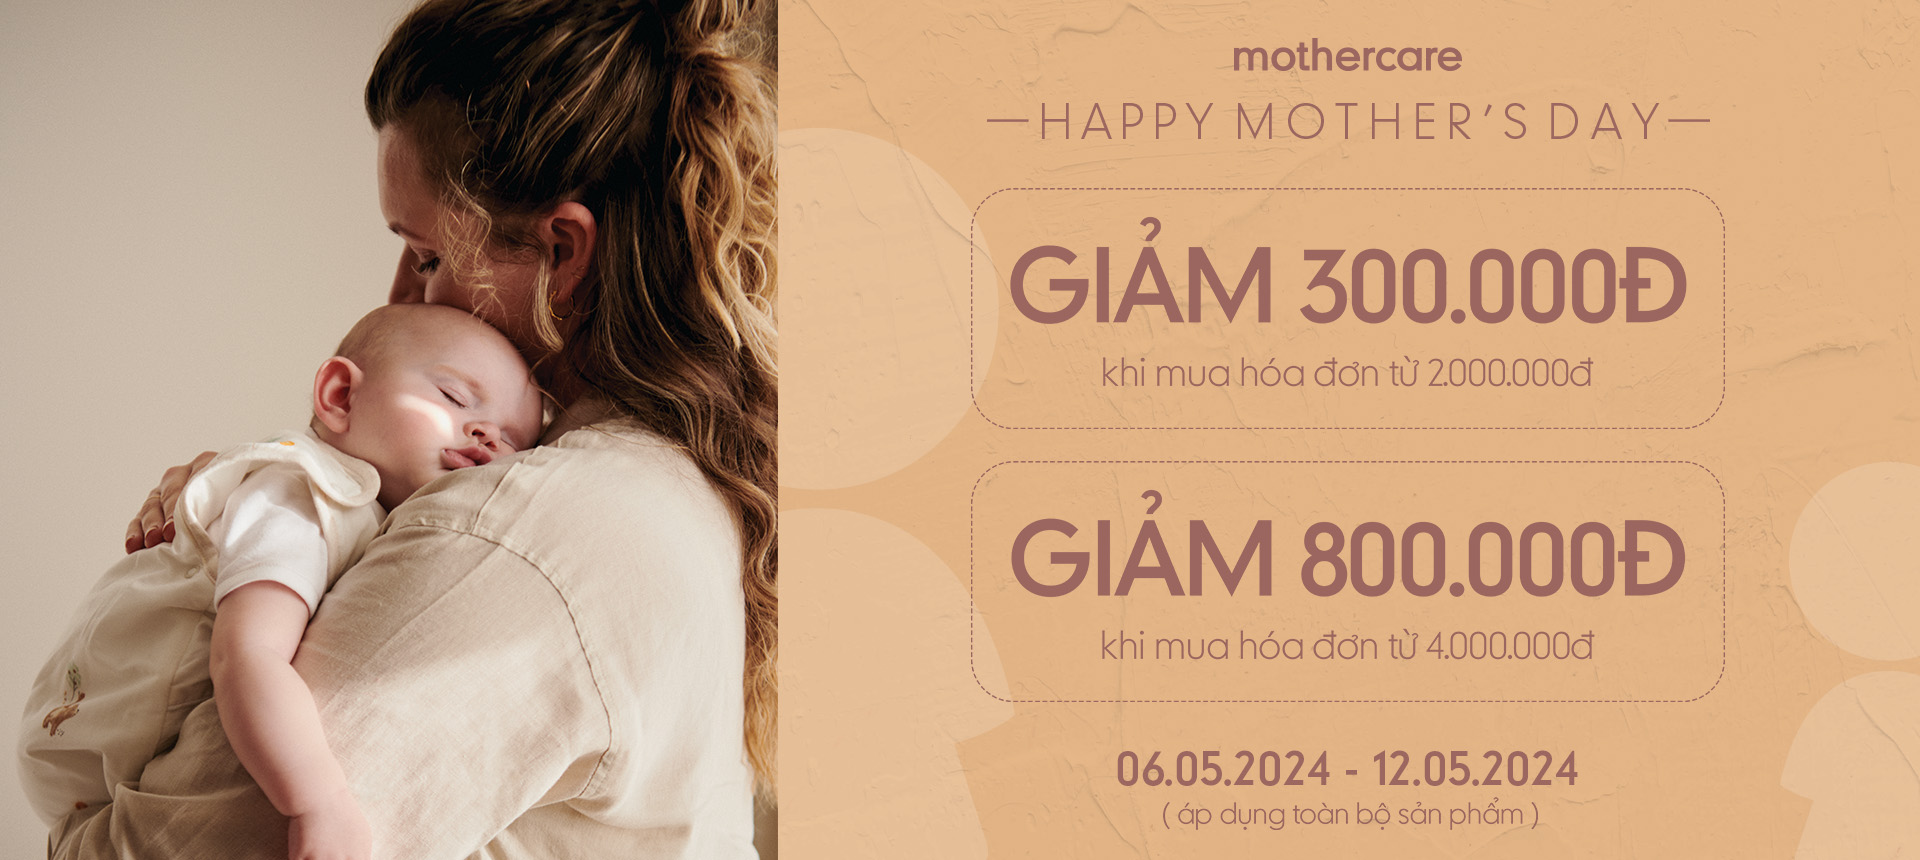 MOTHERCARE - HAPPY MOTHER'S DAY